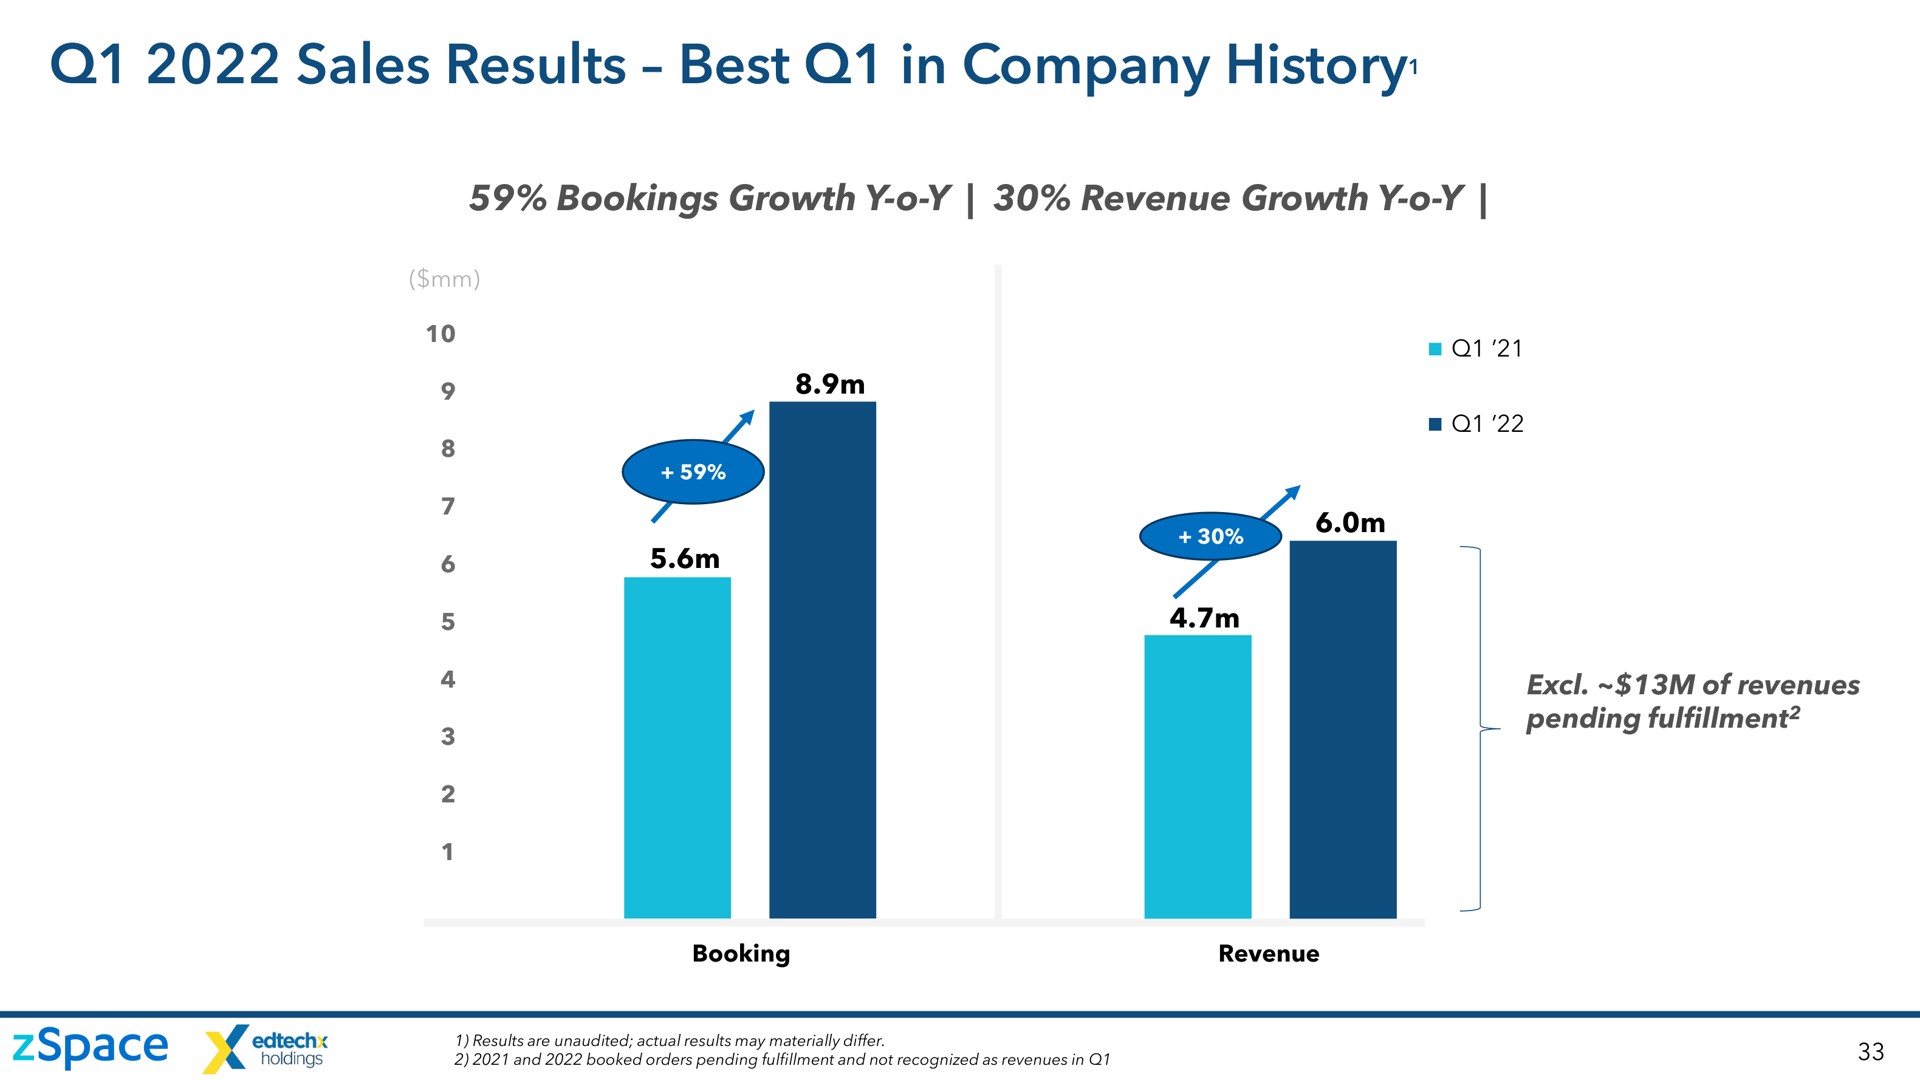 sales results best in company history history | zSpace